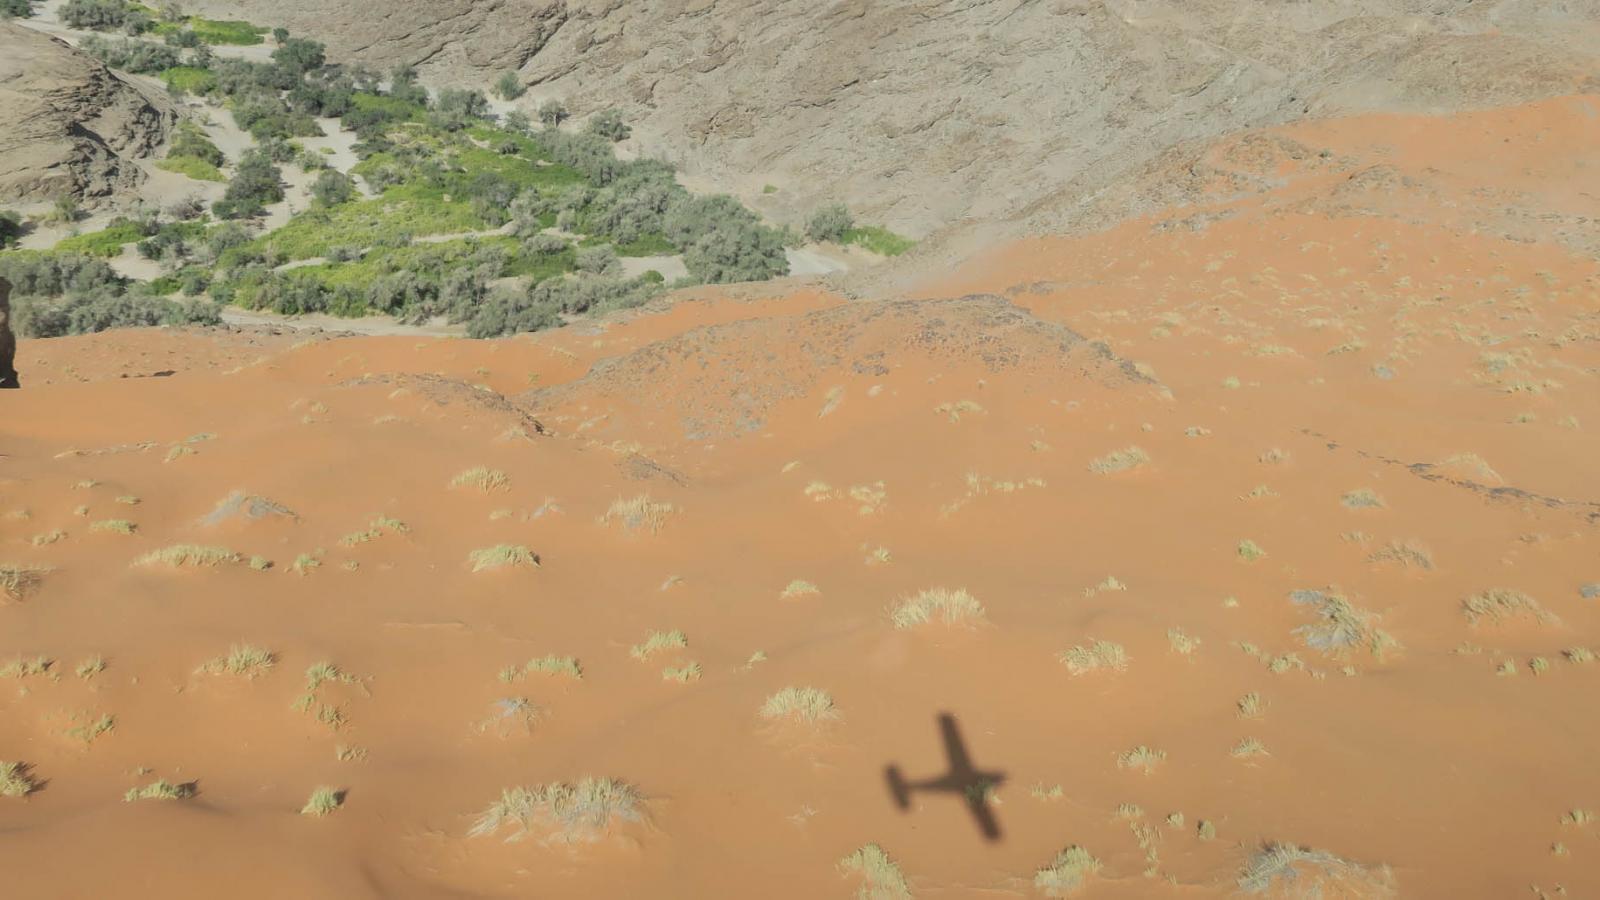 Namibia From The Air: A Scenic Flight From Swakopmund To Sossusvlei